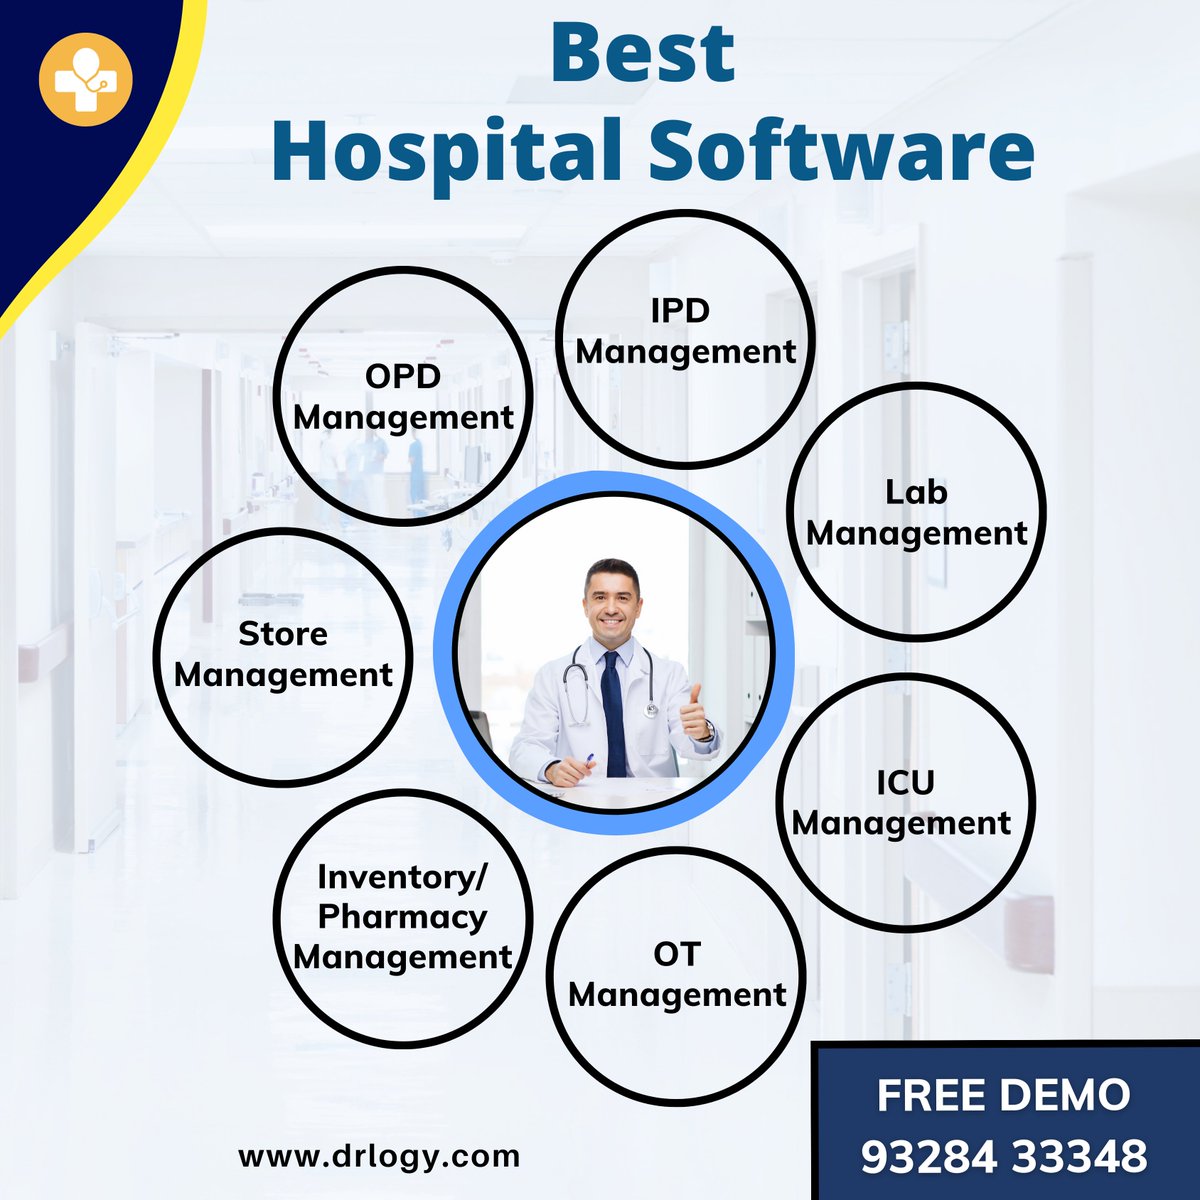 Drlogy hospital Software allows for managing entire operational challenges and activities performed in a hospital.

Visit for more details: drlogy.com/hospital-manag…

#hospitalmanagementsoftware #hospitalmanagement #hospitalsoftware #hospital #hospitalitymanagement #drlogy